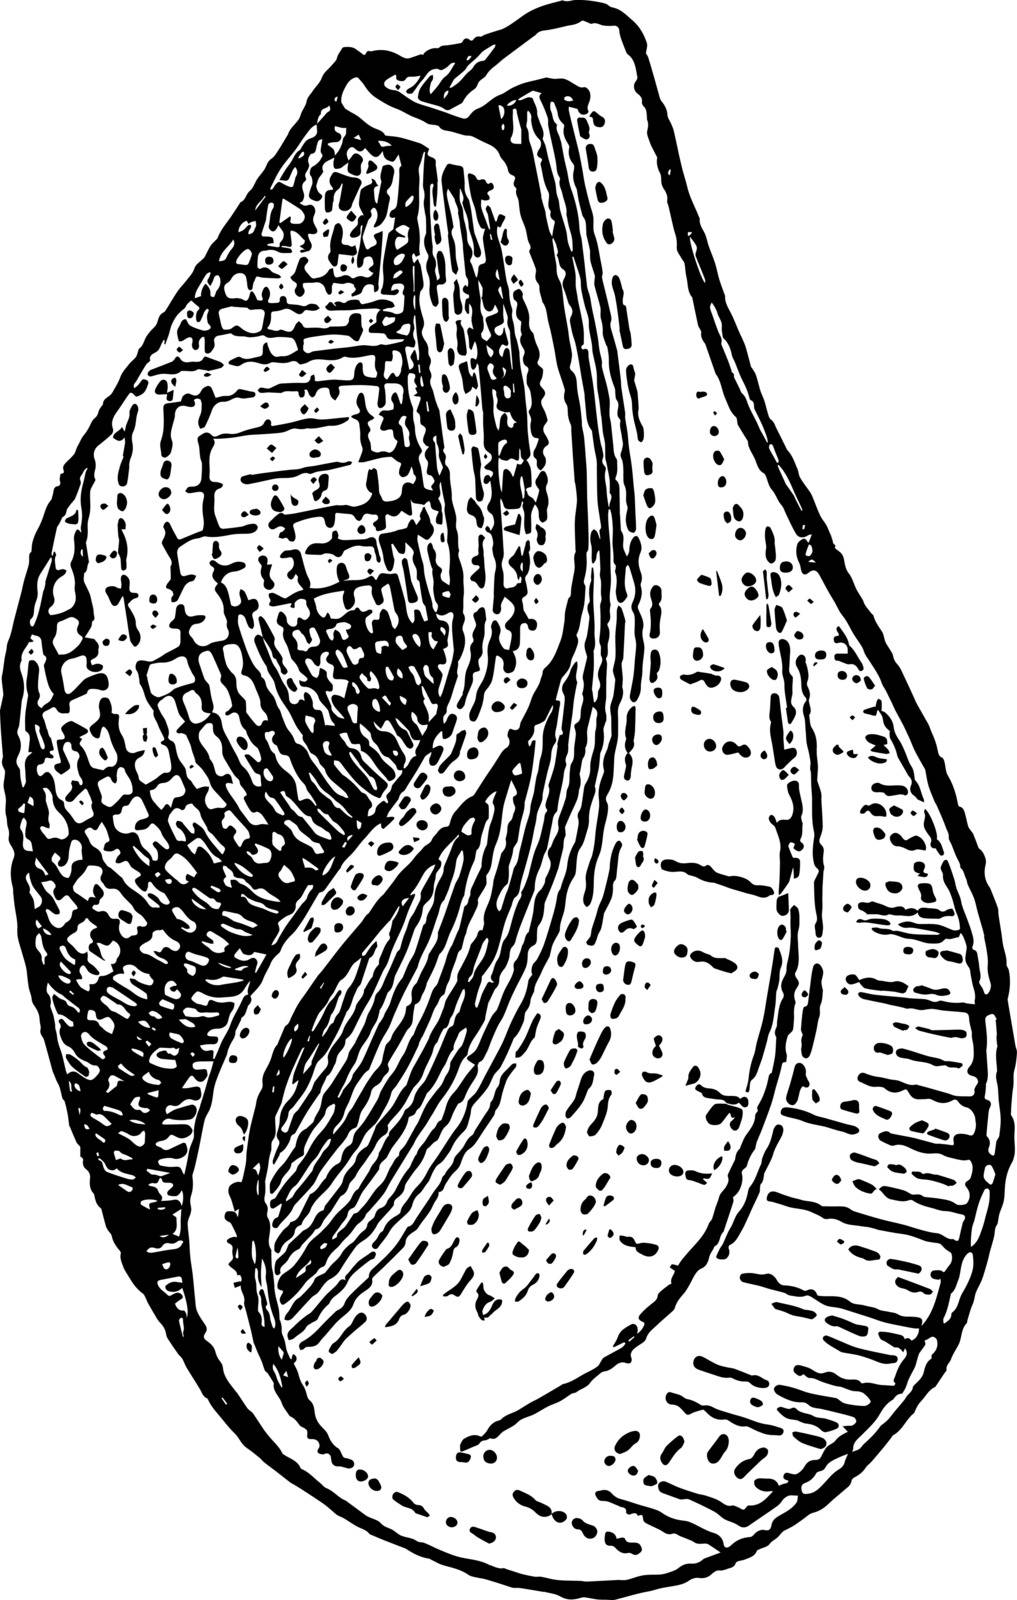 Scaphander is a species of gastropods in the Scaphandridae family vintage line drawing or engraving illustration.